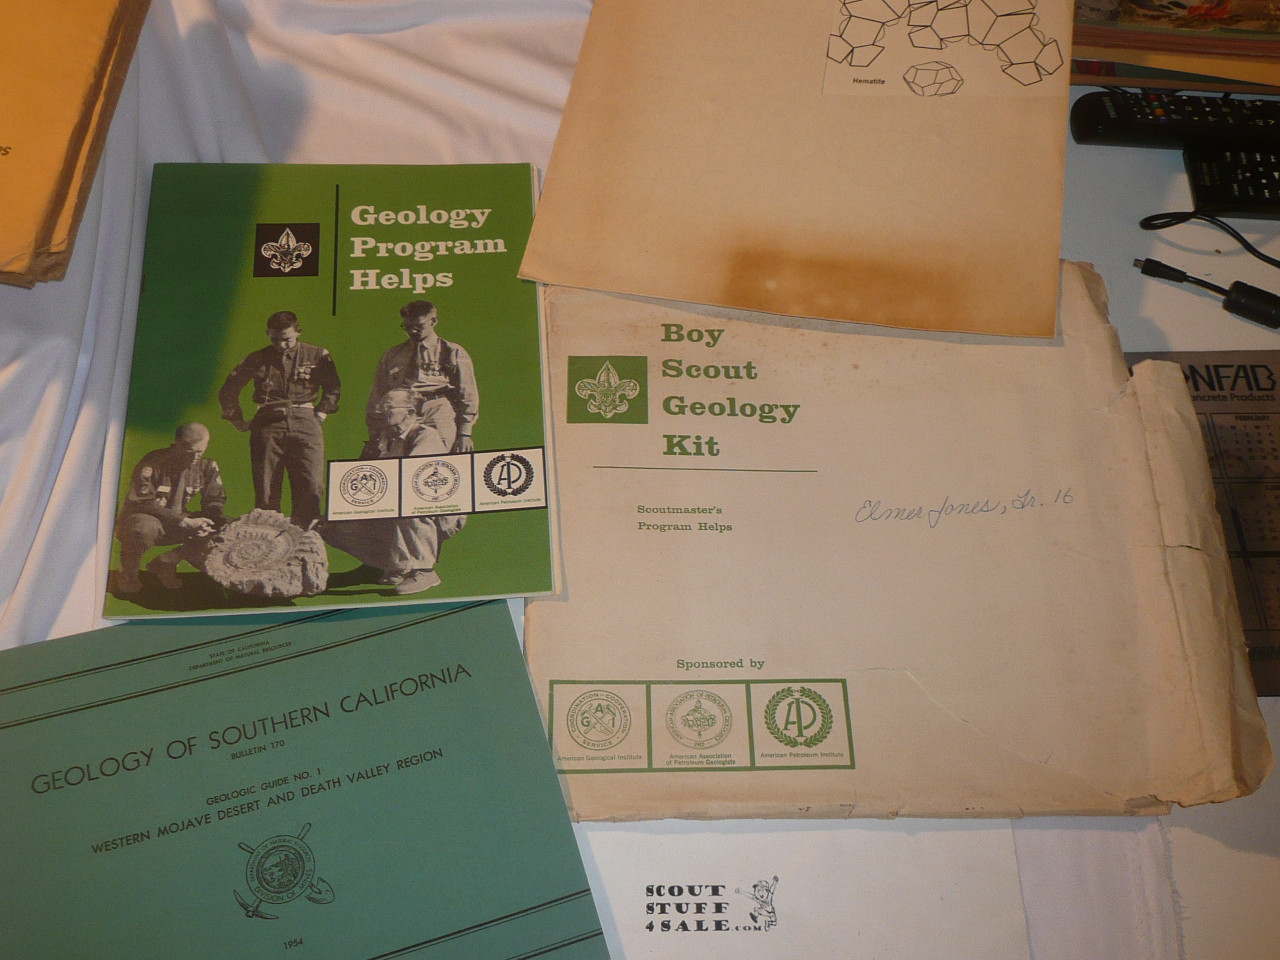 1950's Boy Scout Geology Kit, Scoutmaster's Program Helps